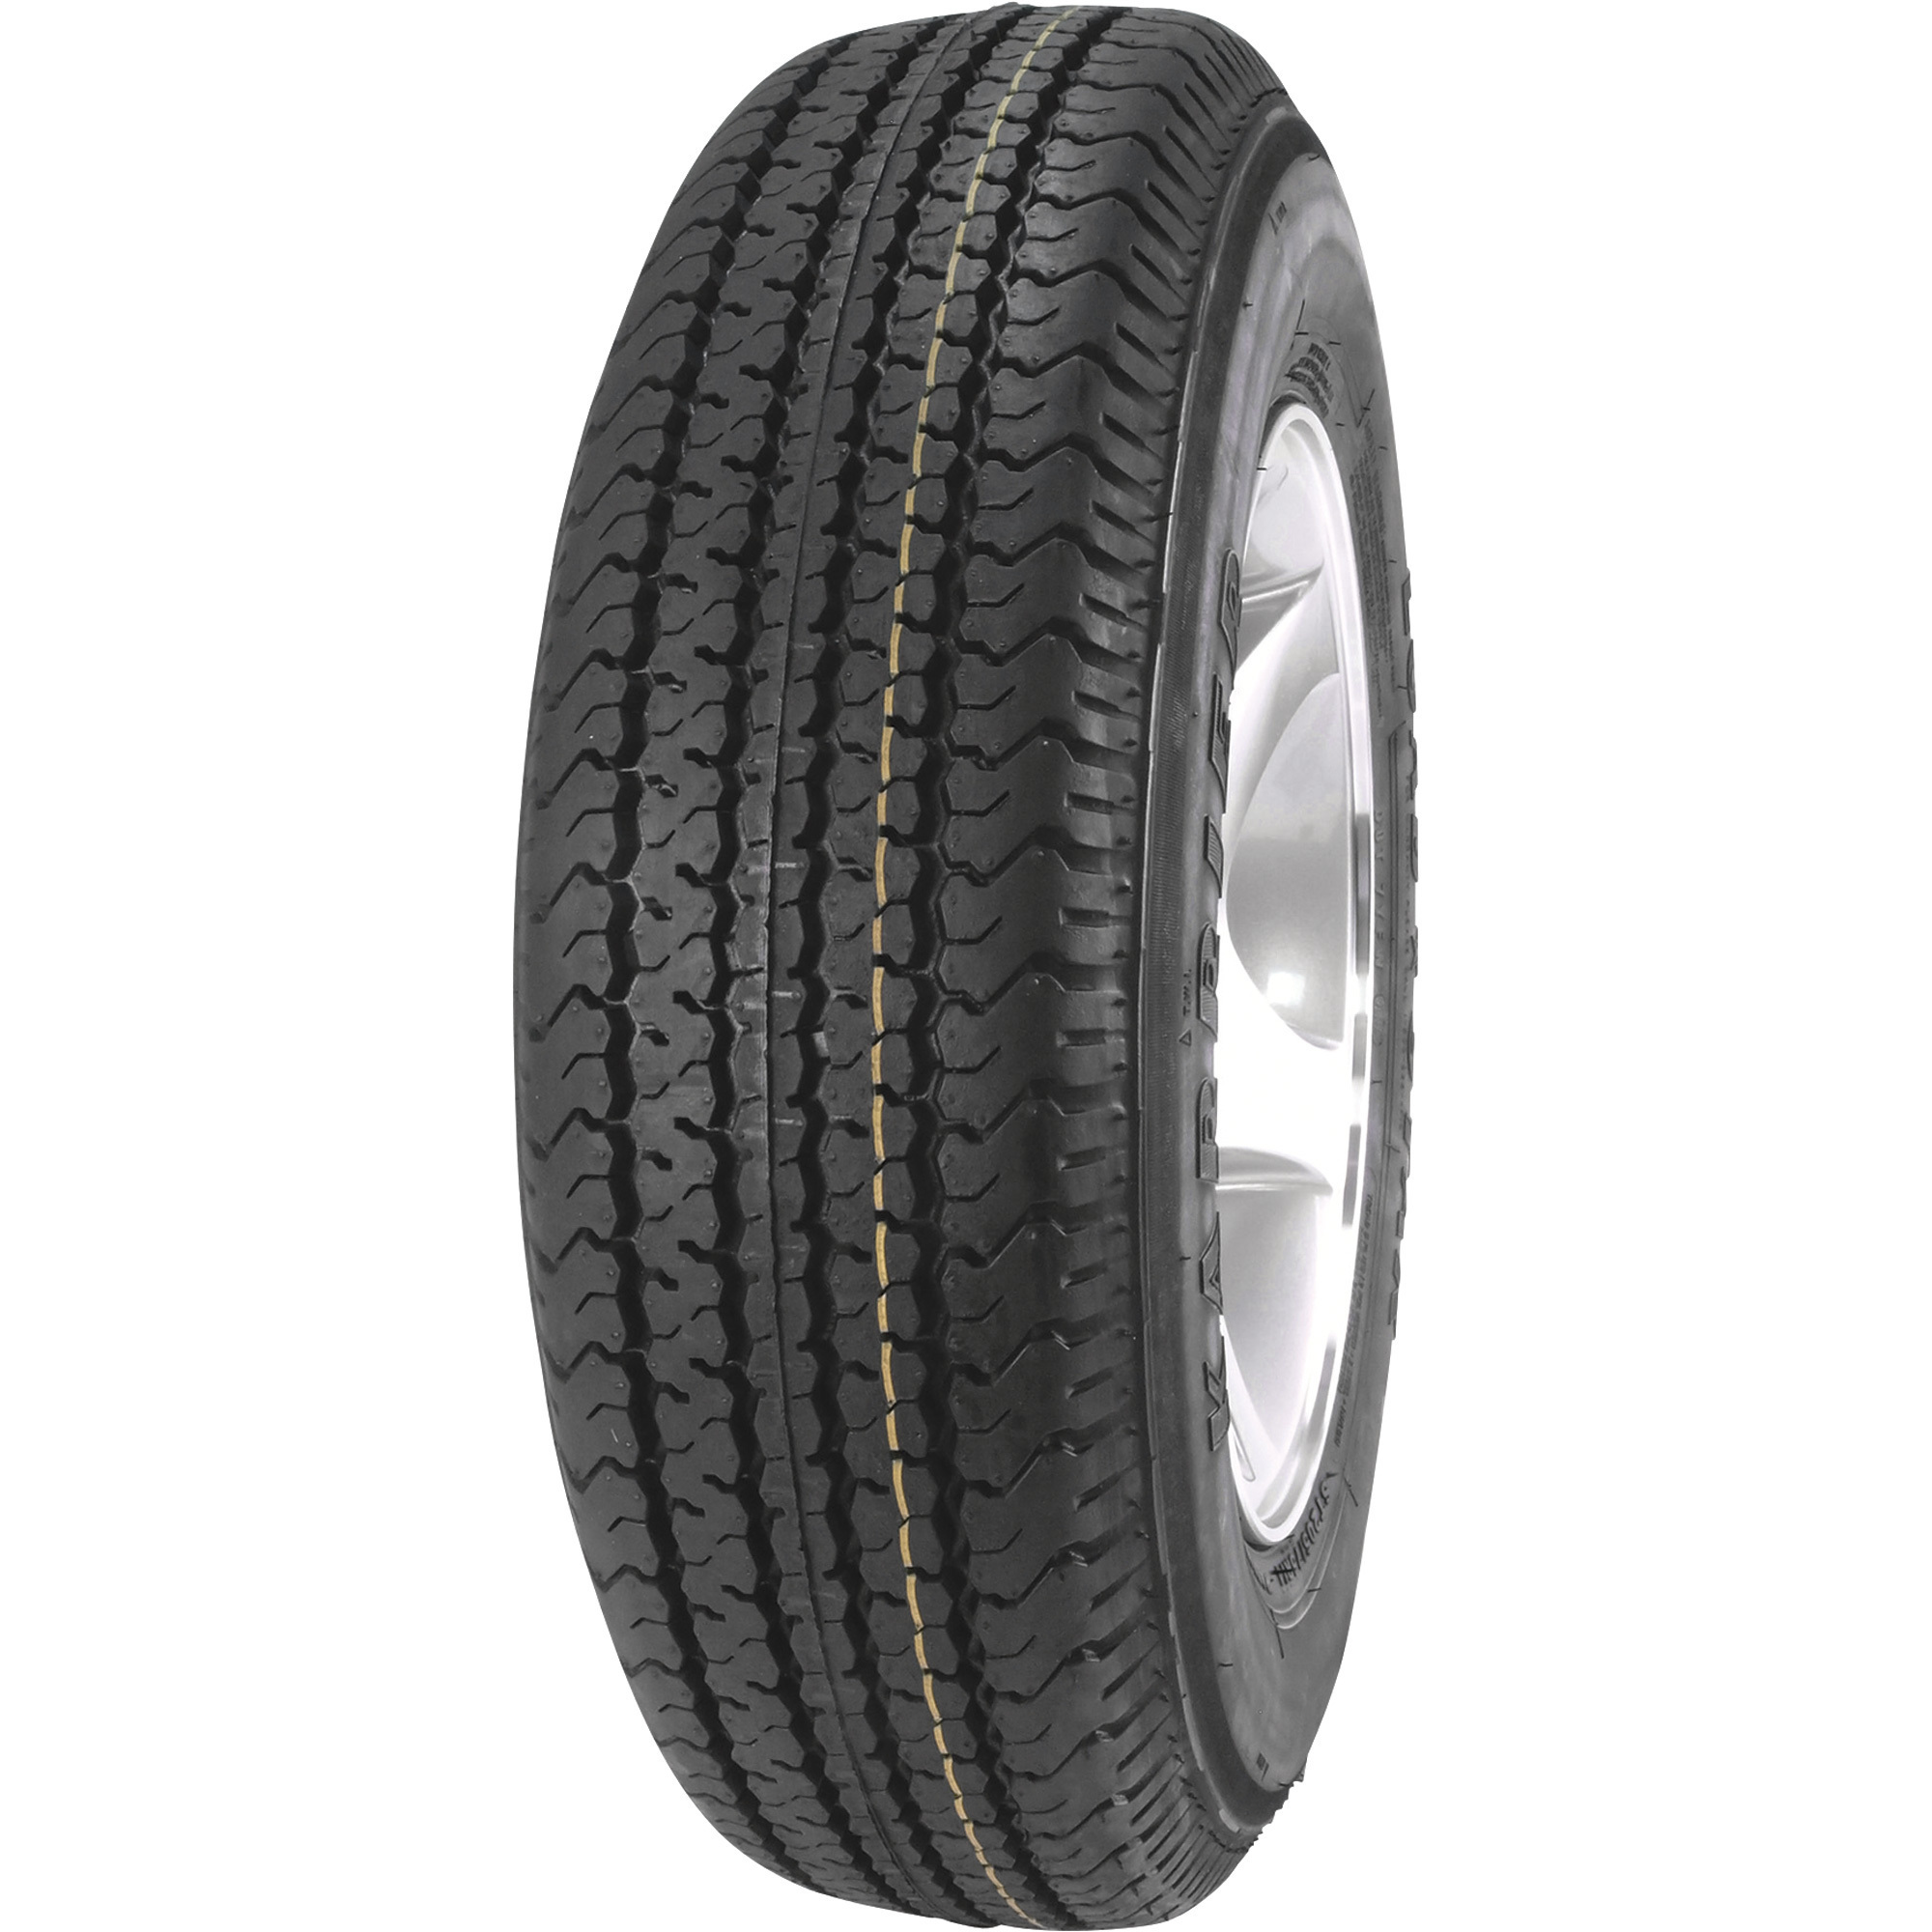 Kenda 15Inch Radial Replacement Trailer Tire -ST225/75R-15, Load Range C, Model 225R5C-I